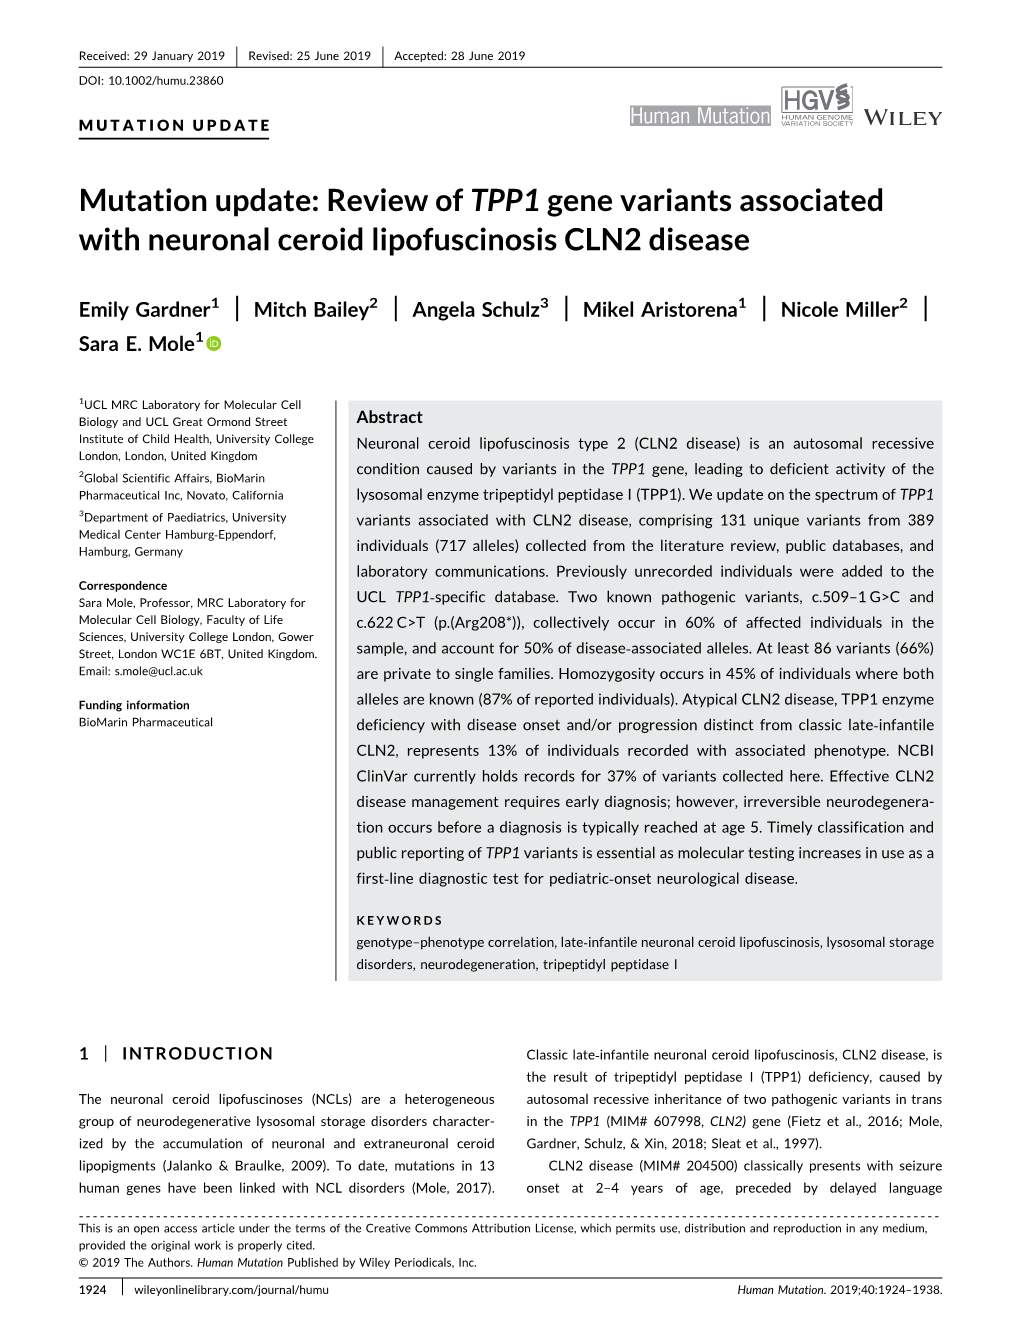 Mutation Update: Review of TPP1 Gene Variants Associated with Neuronal Ceroid Lipofuscinosis CLN2 Disease